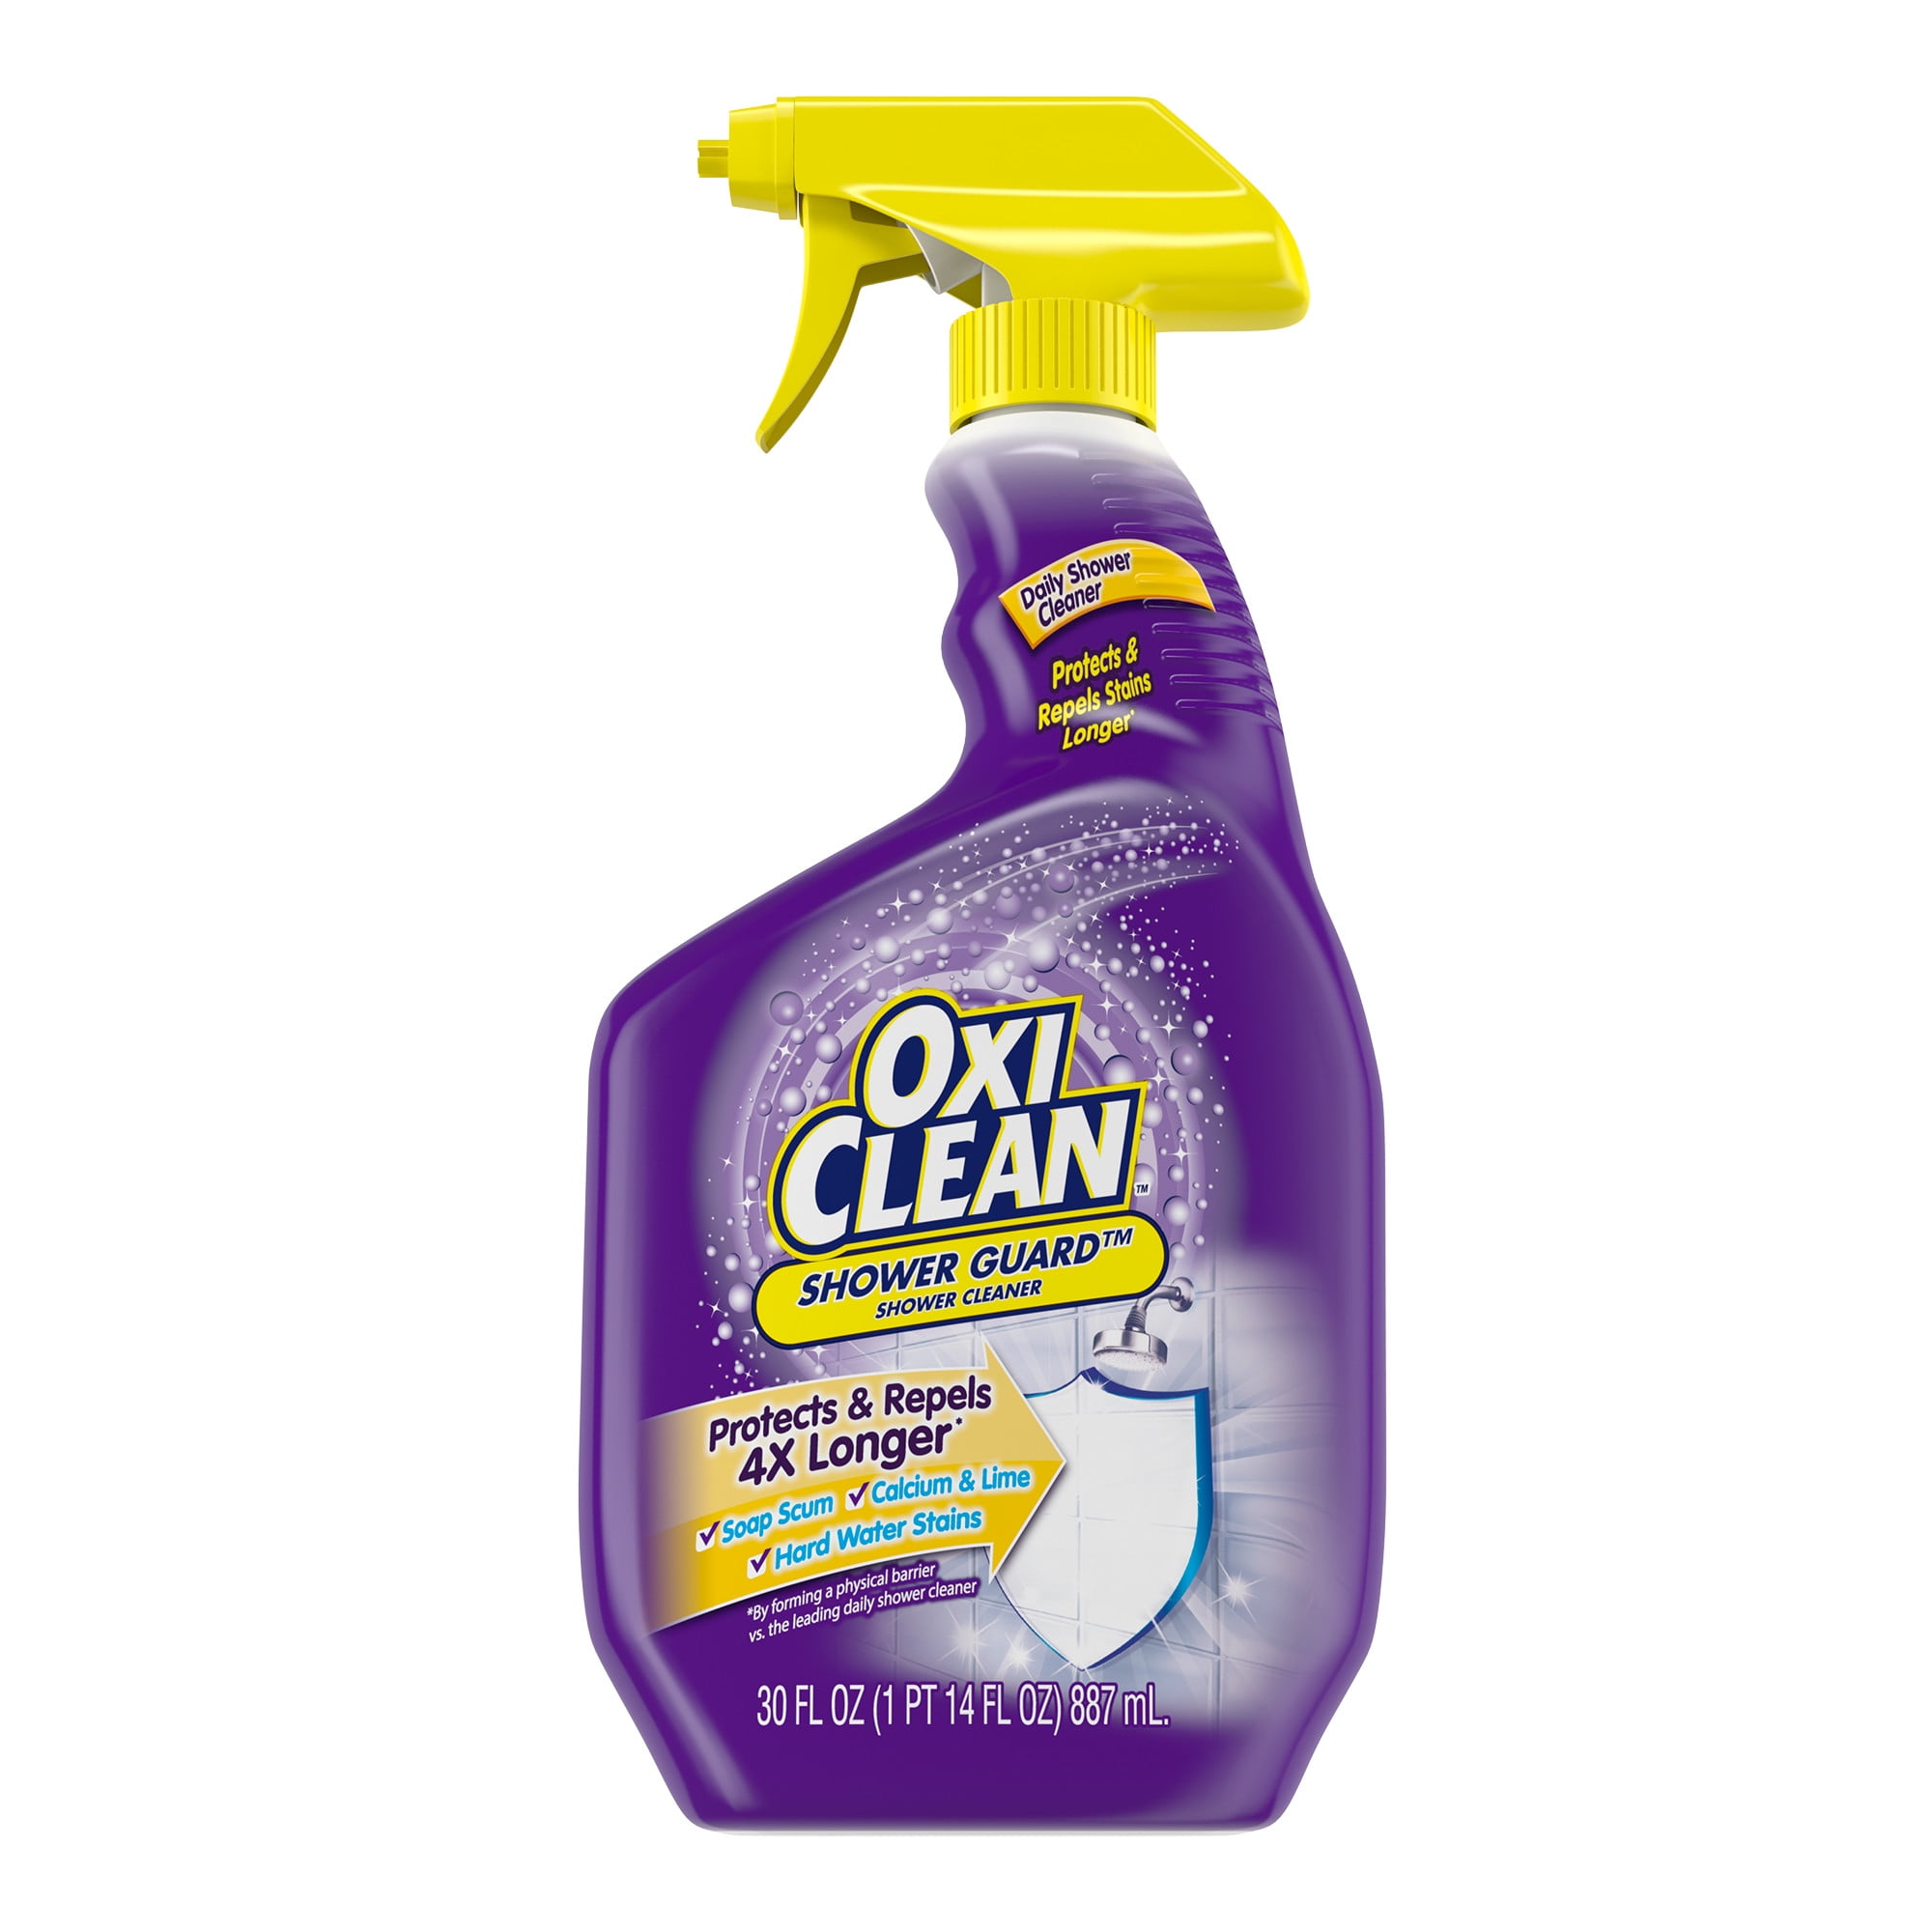 OxiClean Shower Guard Daily Shower Cleaner, 30oz., Protects  Repels Stains